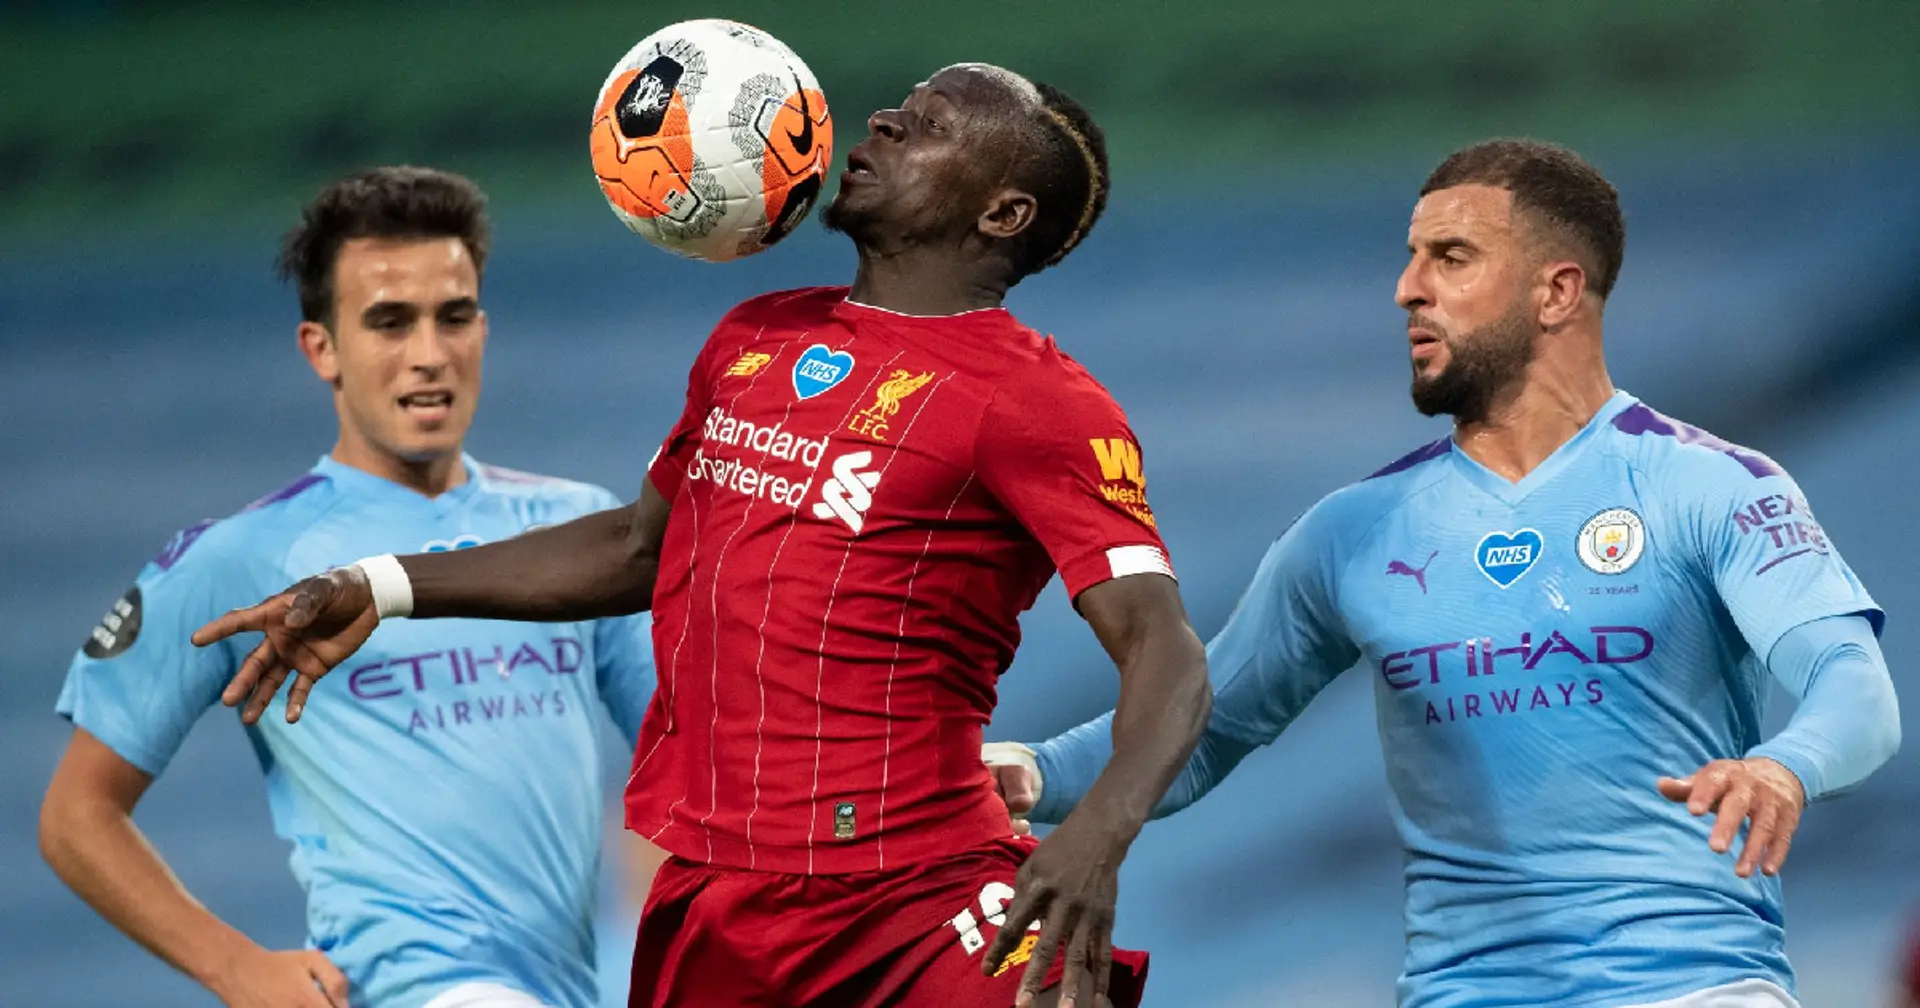 Man City vs Liverpool: Team news, probable line-ups, score predictions and more - preview